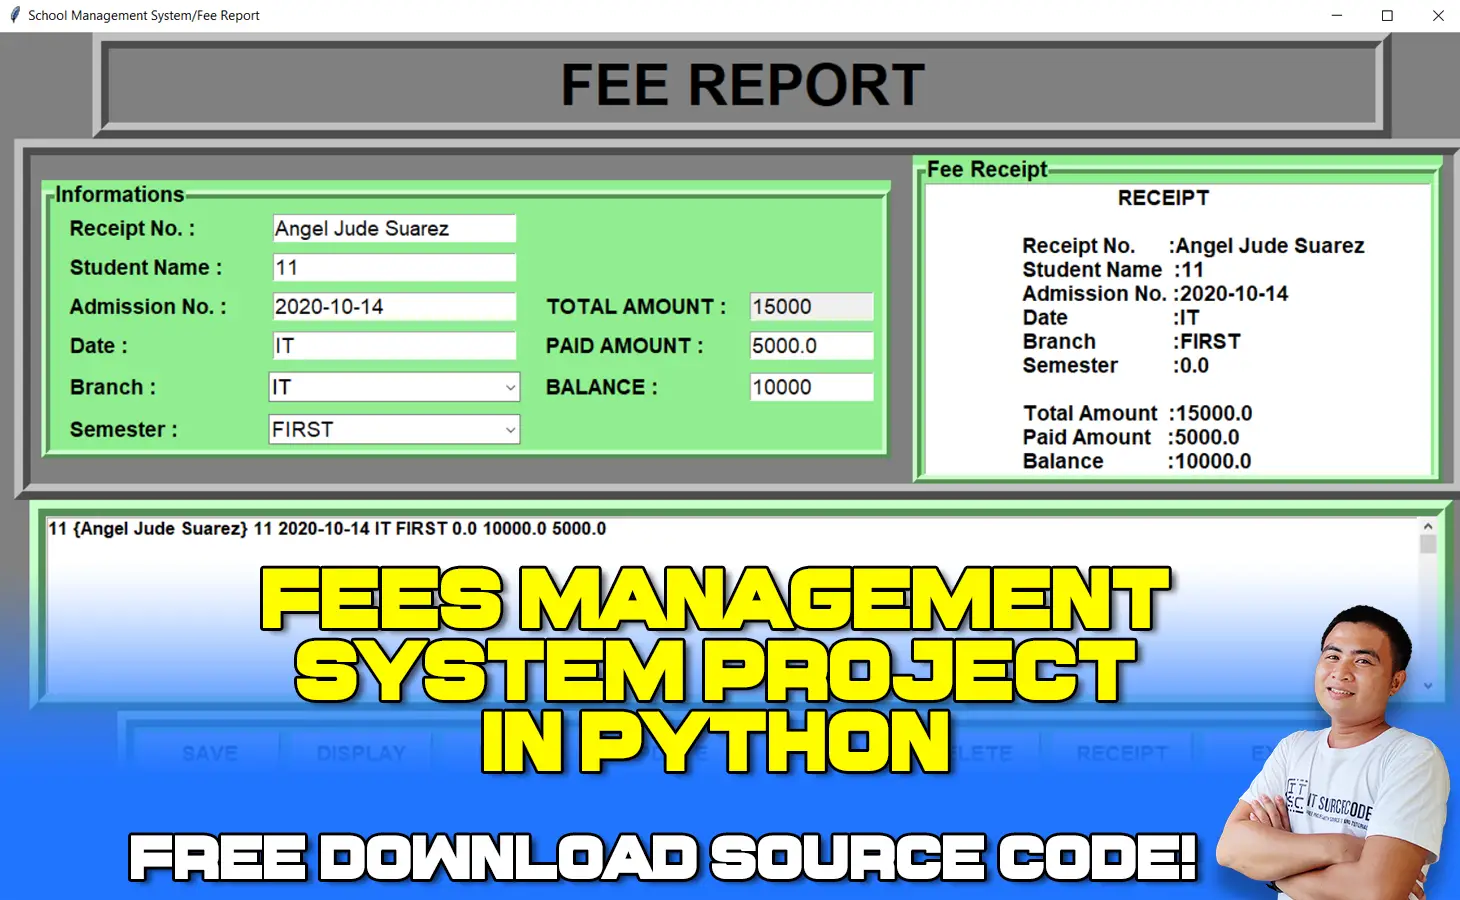 Fees Management System Project in Python with Source Code